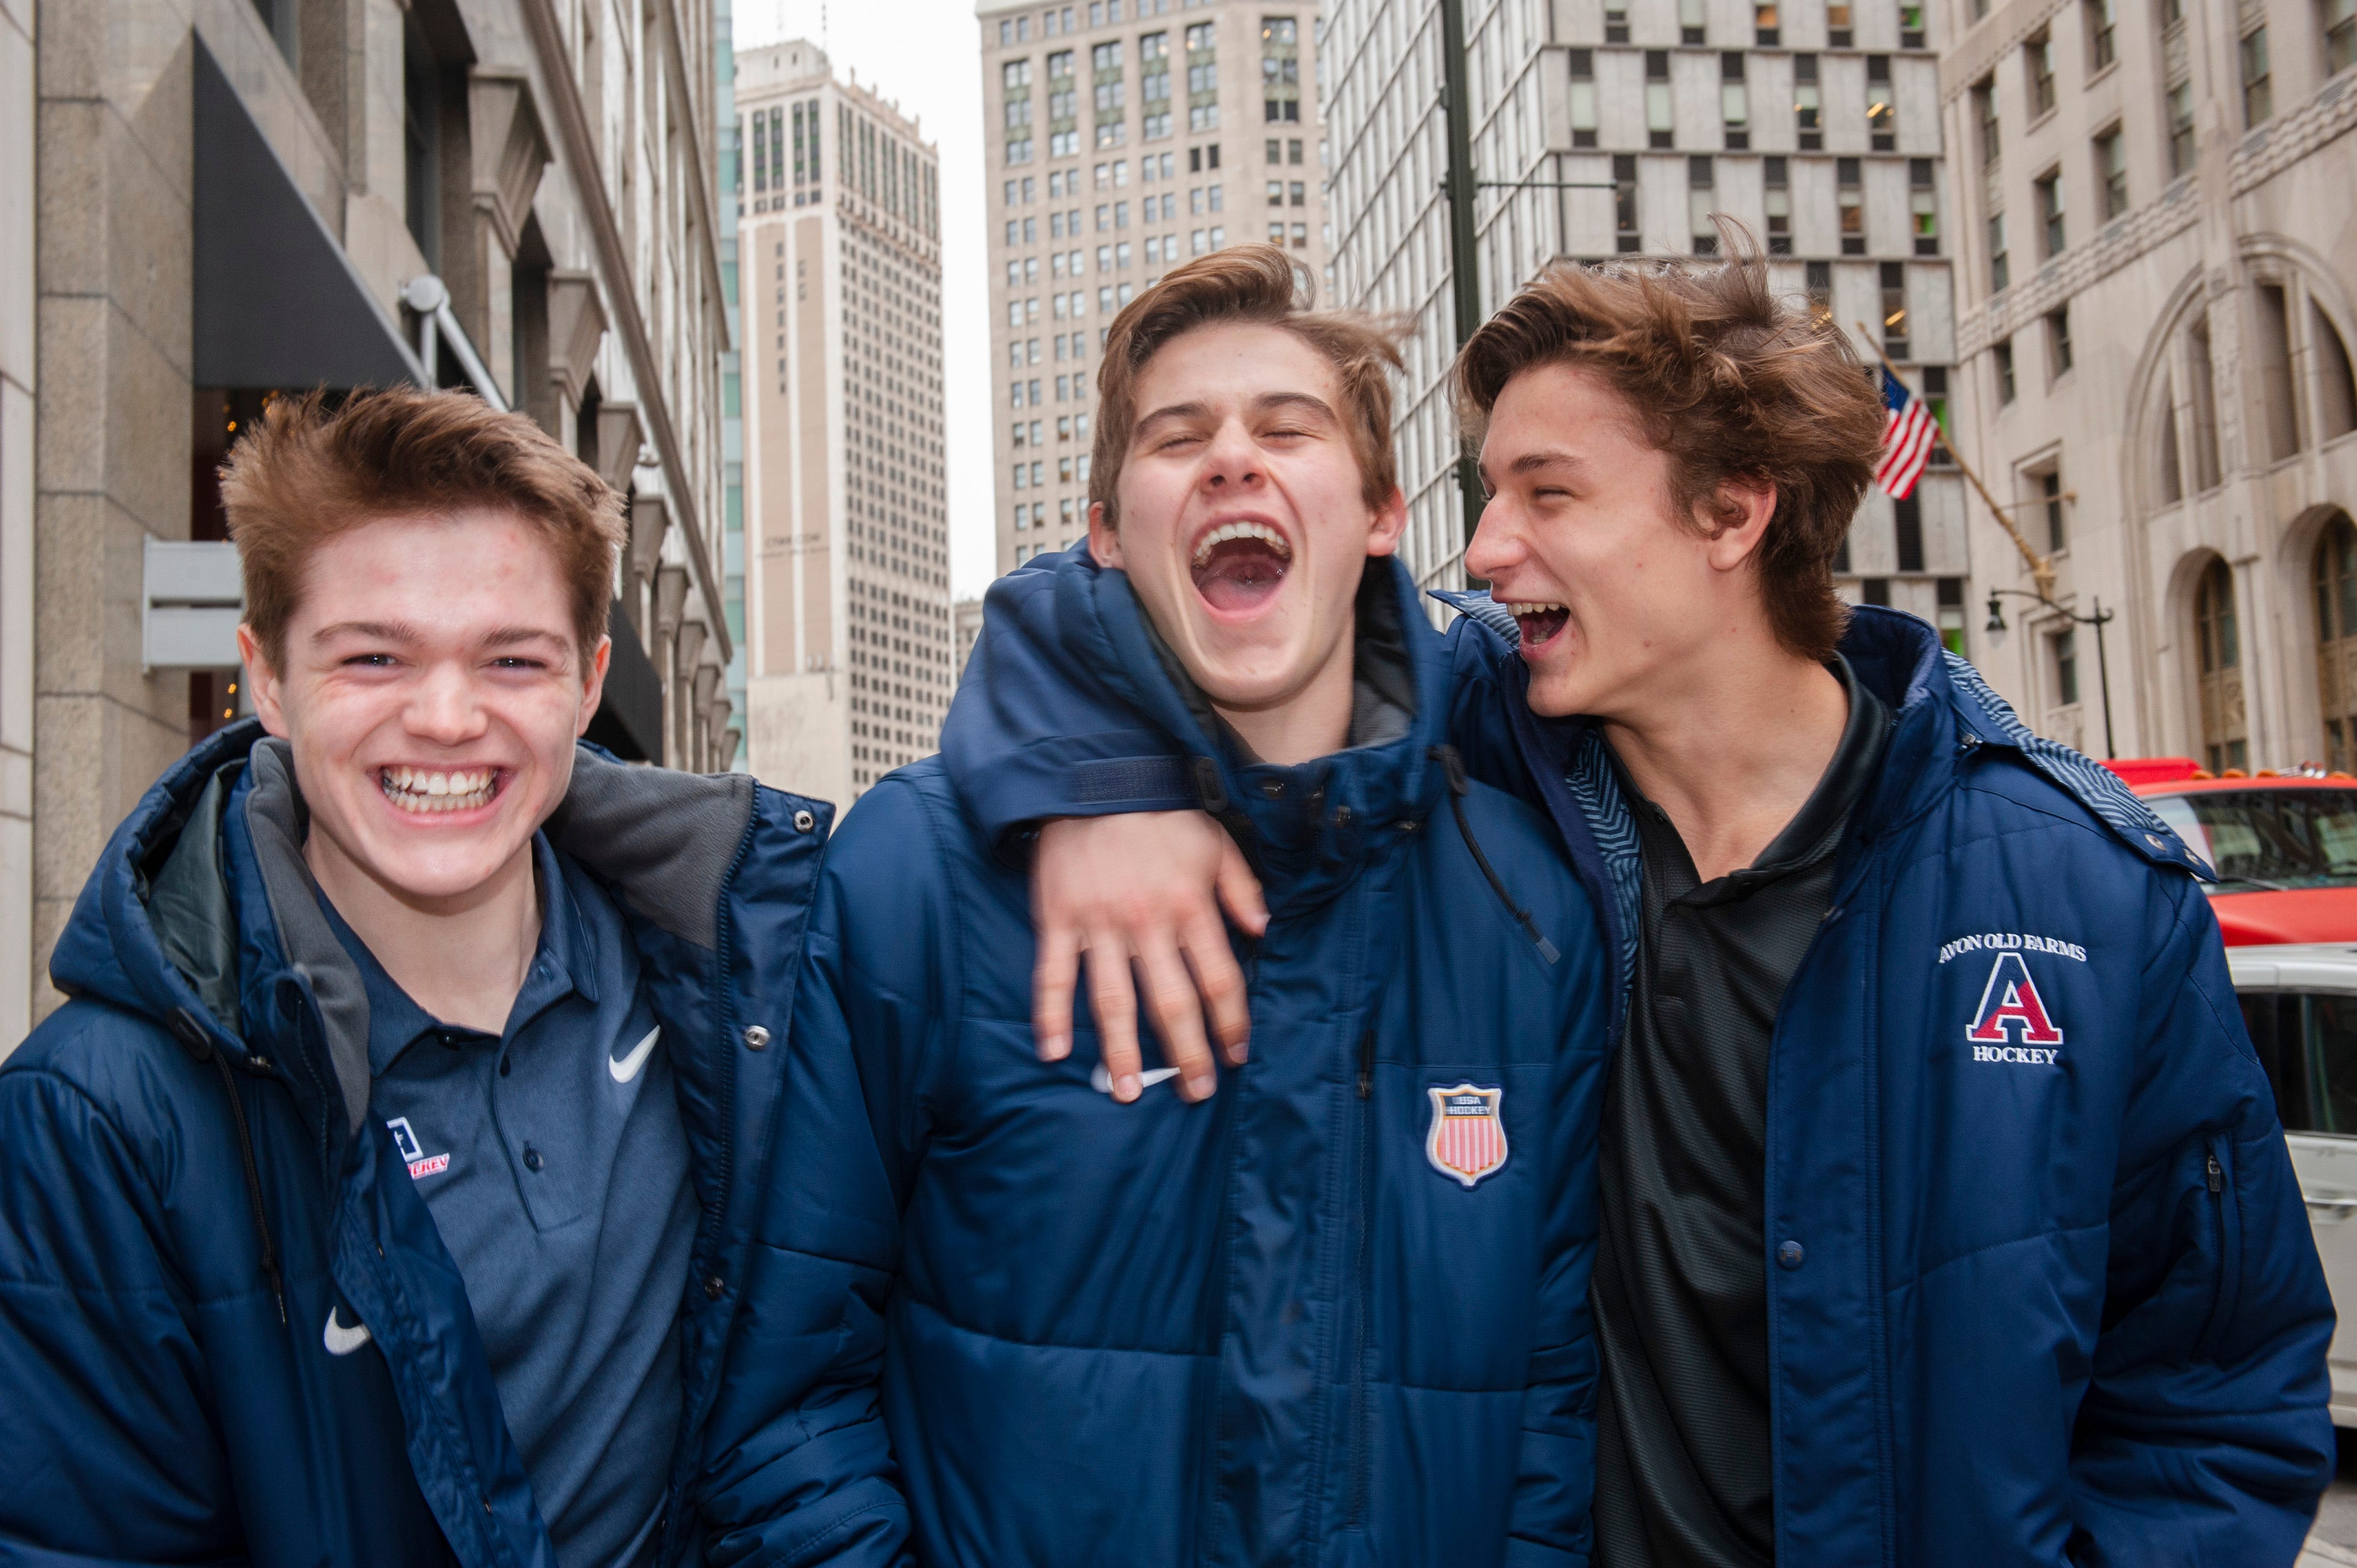 Top-rated NHL draft prospect Jack Hughes, center, jokes around with his linemates Cole Caufield, left, and Trevor Zegras, in downtown Detroit.  They are teammates on the U.S. National Under-18 Team.